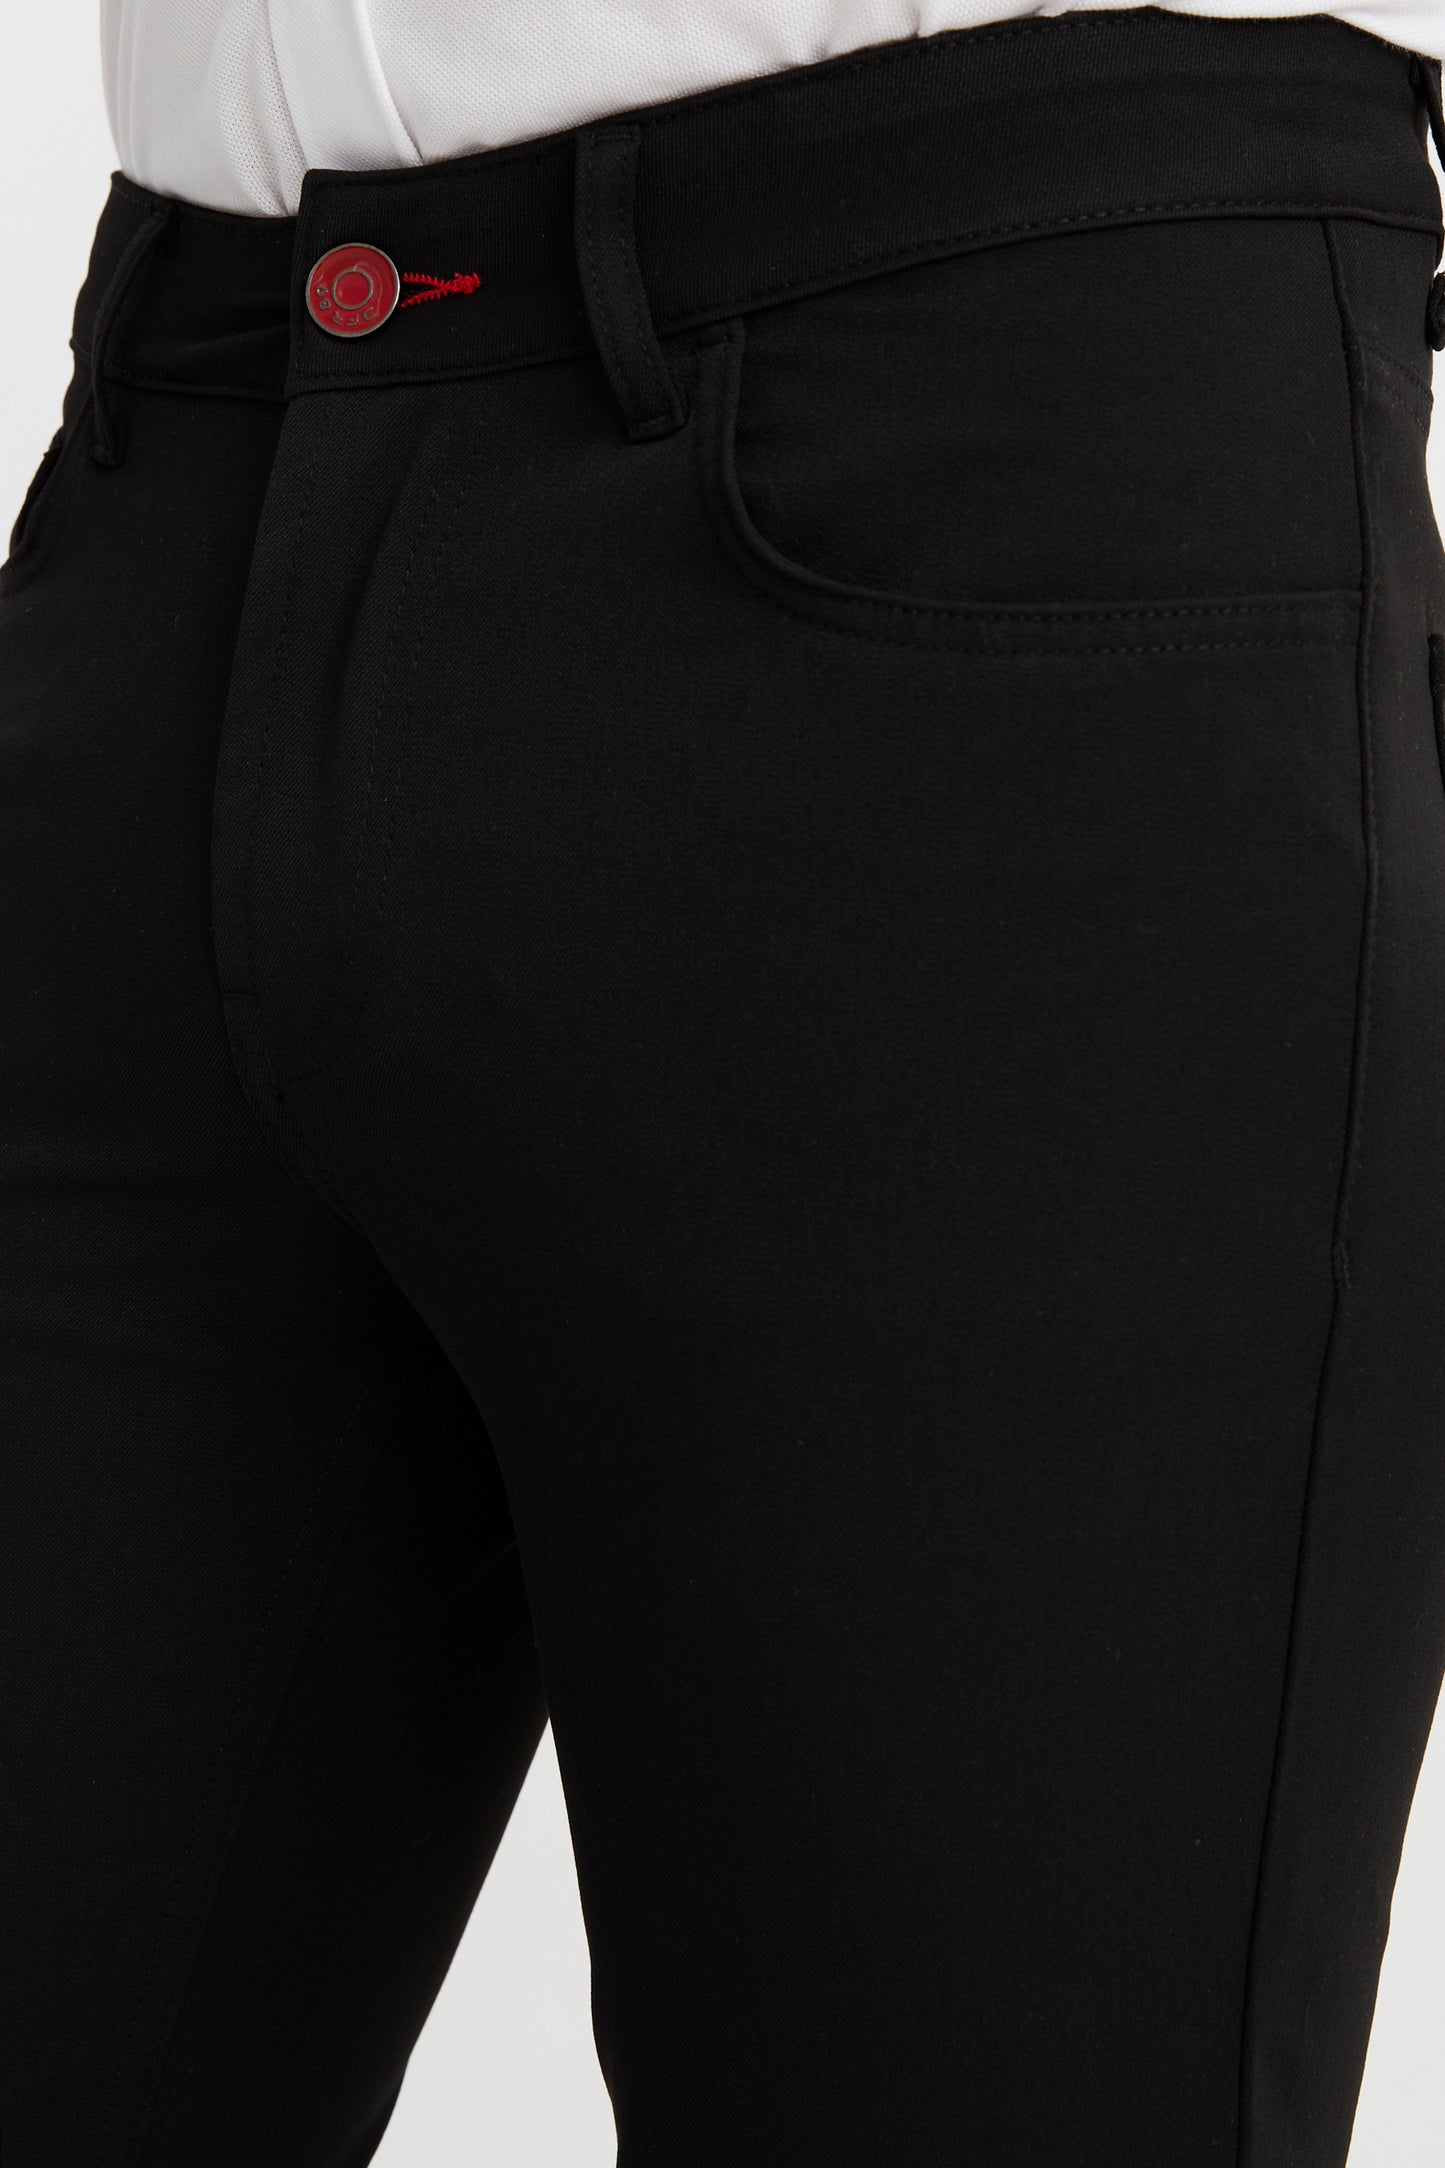 DFR89 men's slim black dress pants. Wrinkle resistant and stretchy, for the ultimate combination of style and comfort.